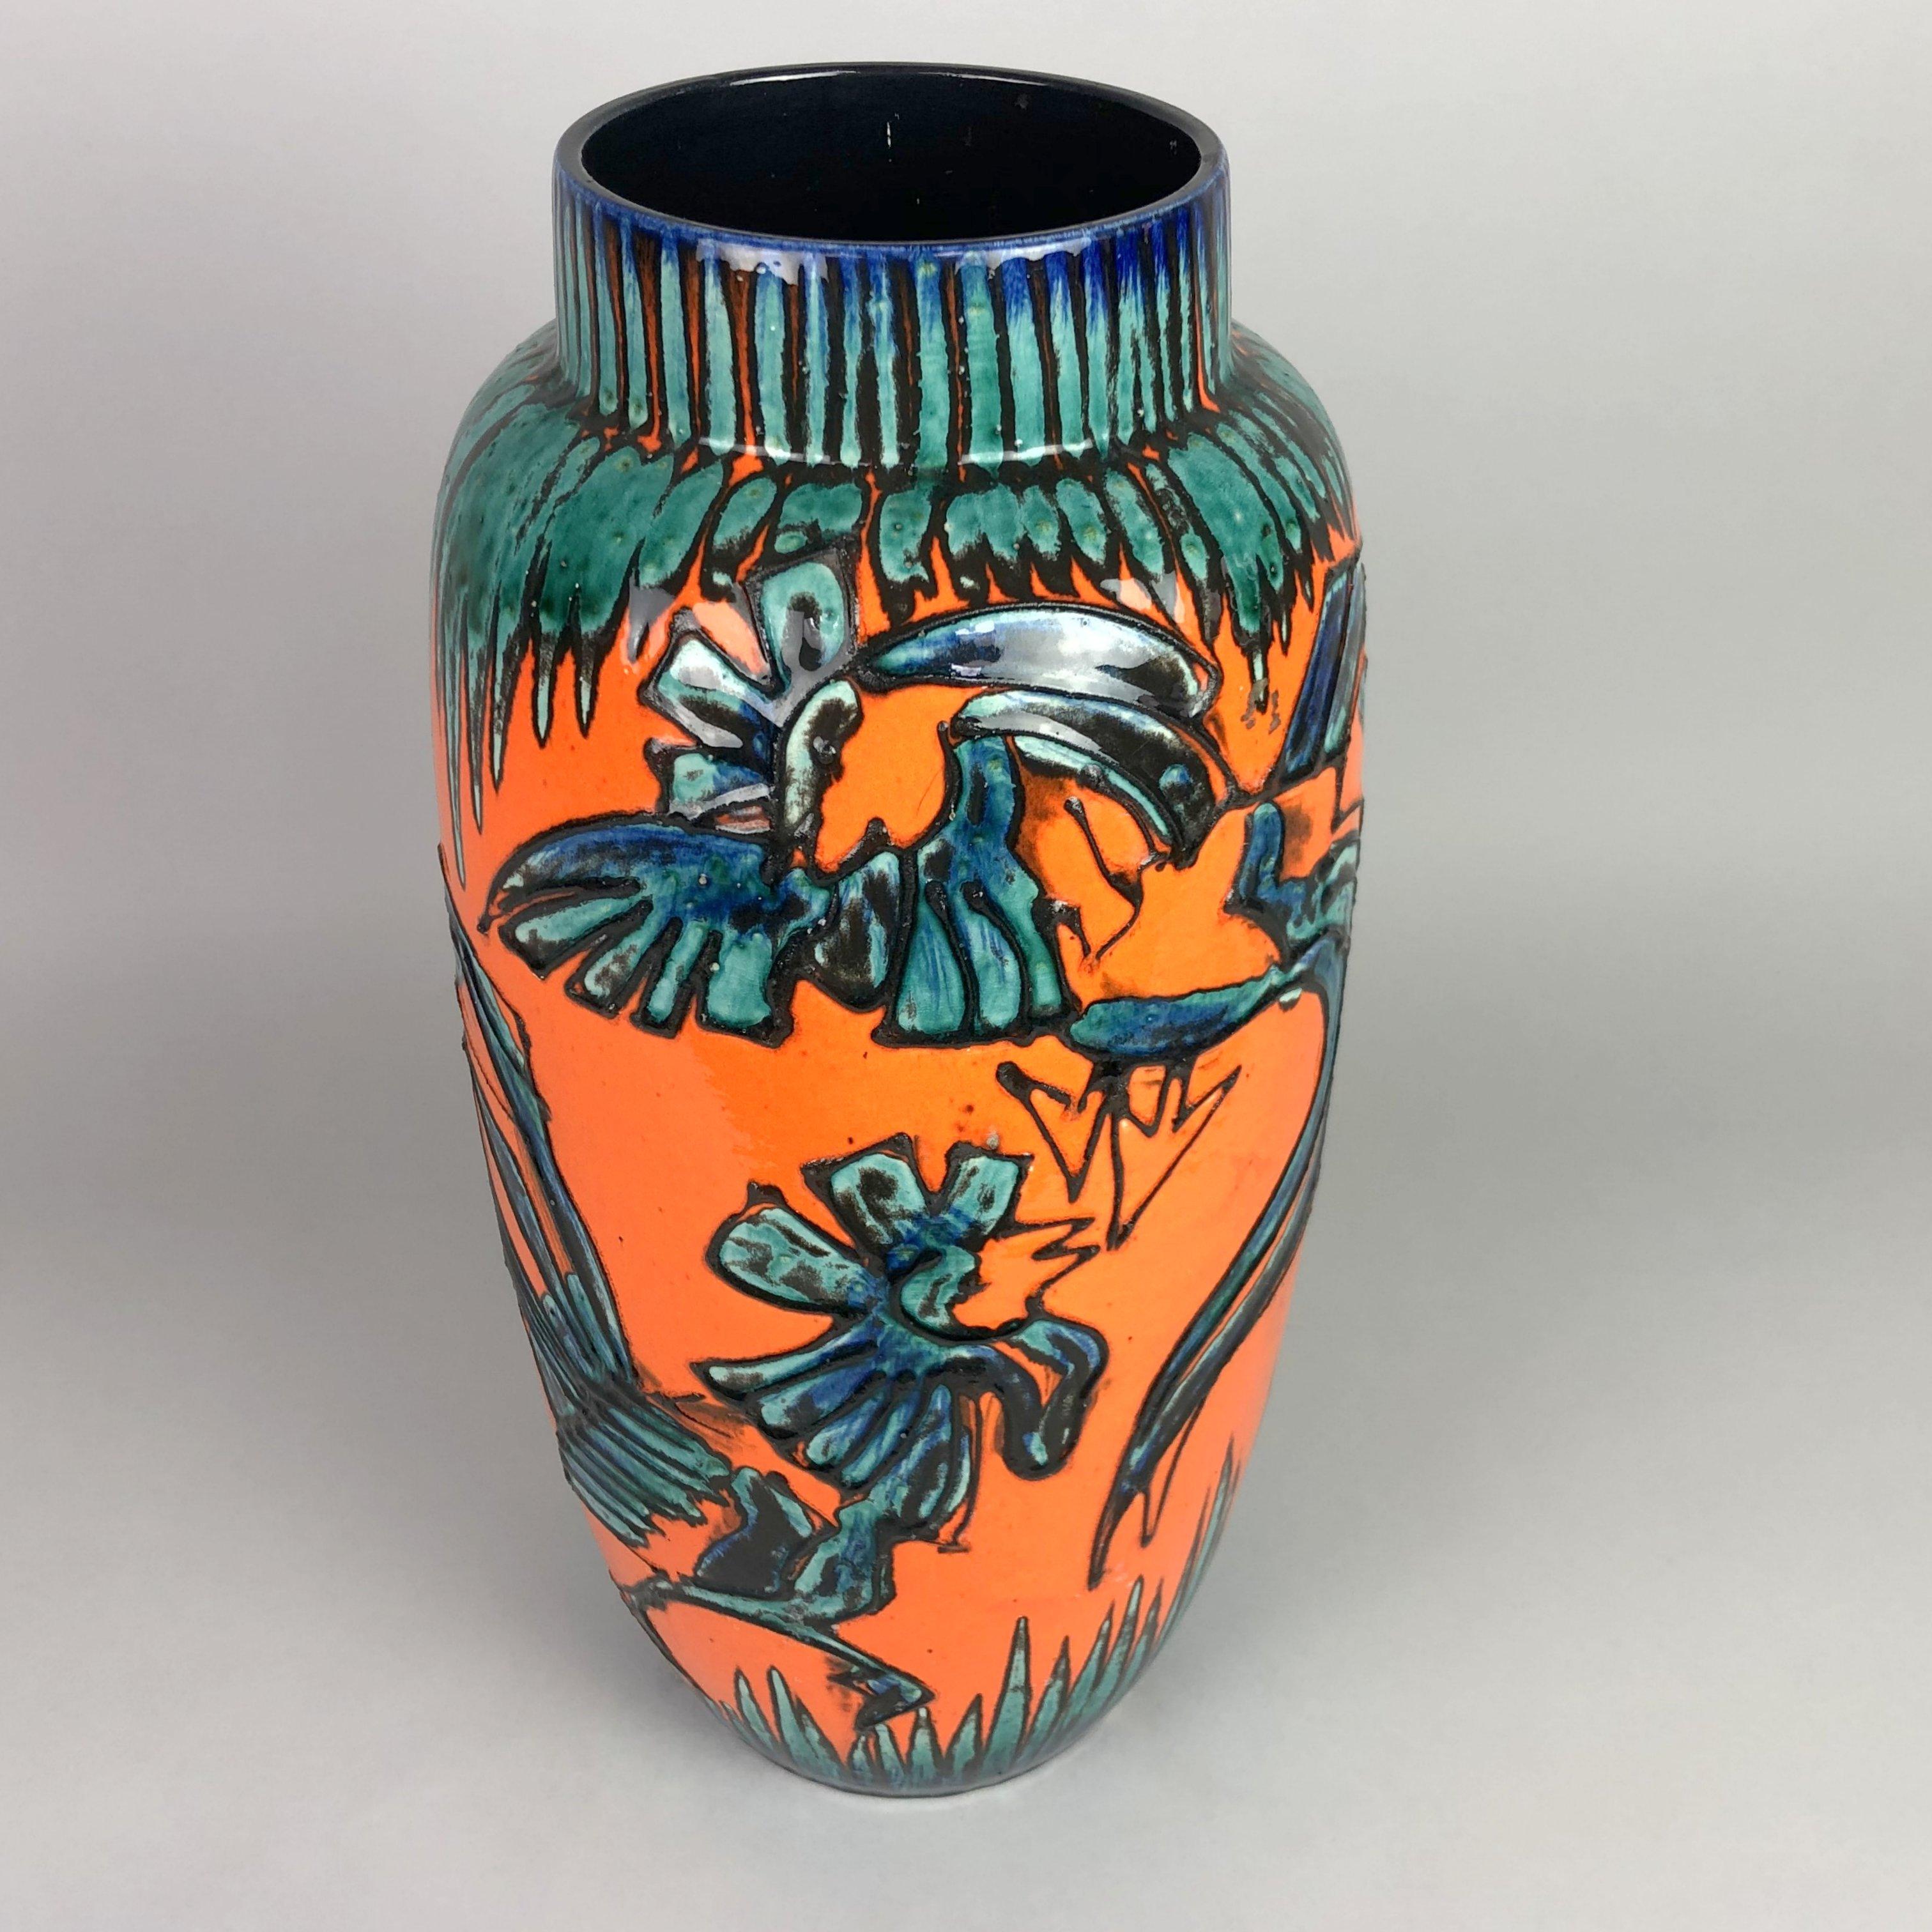 Gorgeous German vintage large floor vase from Scheurich Keramik, decorated with orange and green fat lava glaze - rooster. Marked with number 553-52. Overall in a very good condition, except one little chip at the very bottom of the vase (see photo).